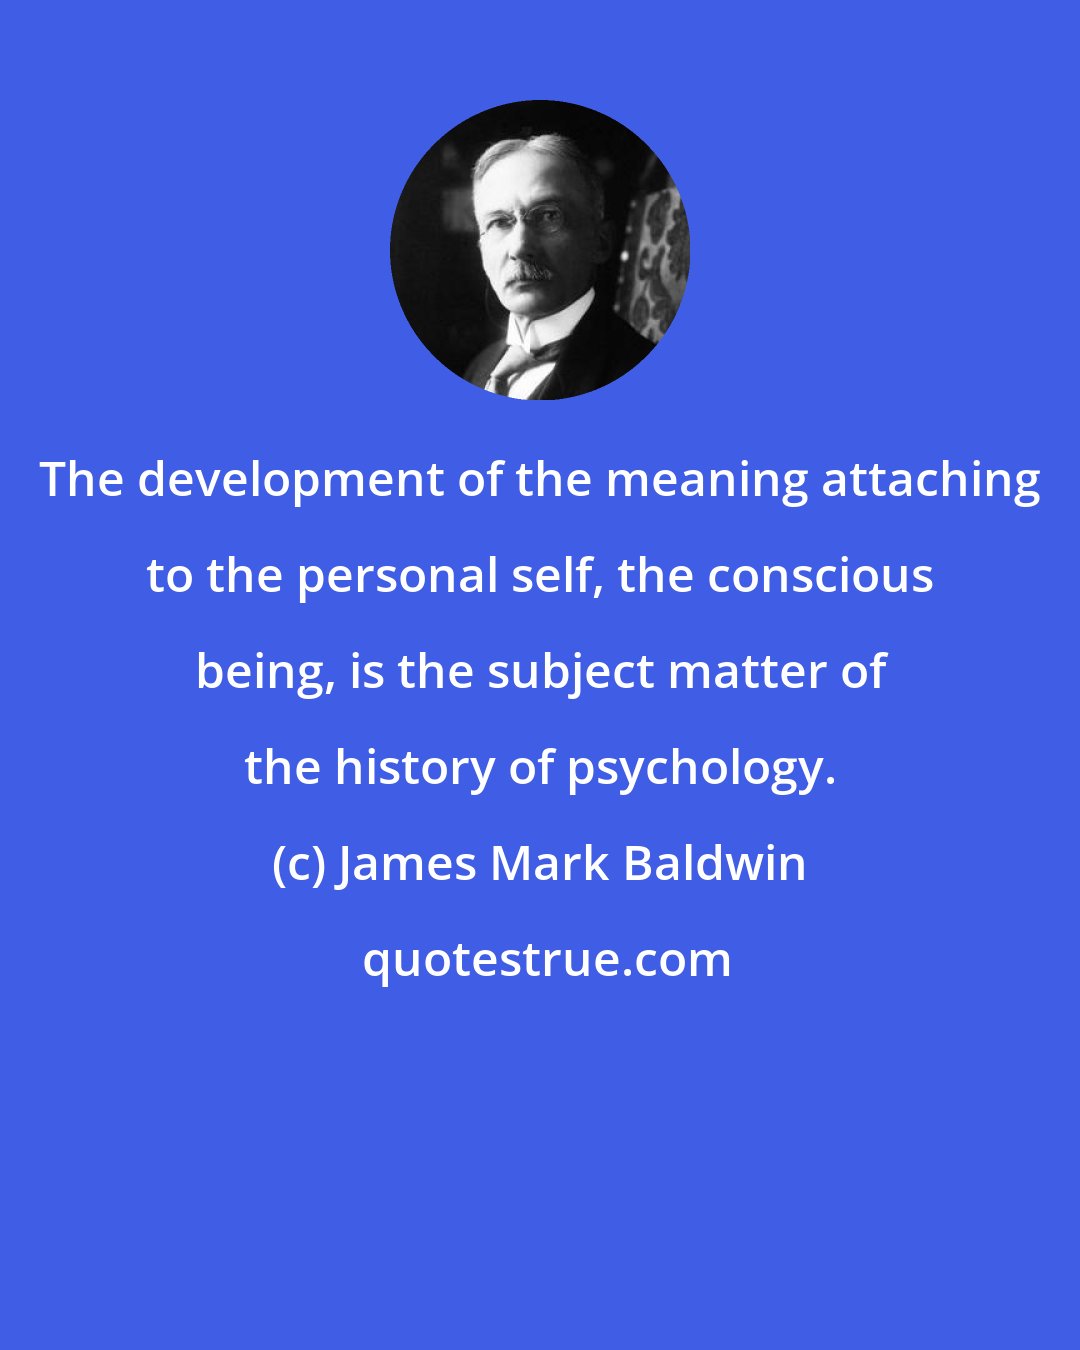 James Mark Baldwin: The development of the meaning attaching to the personal self, the conscious being, is the subject matter of the history of psychology.